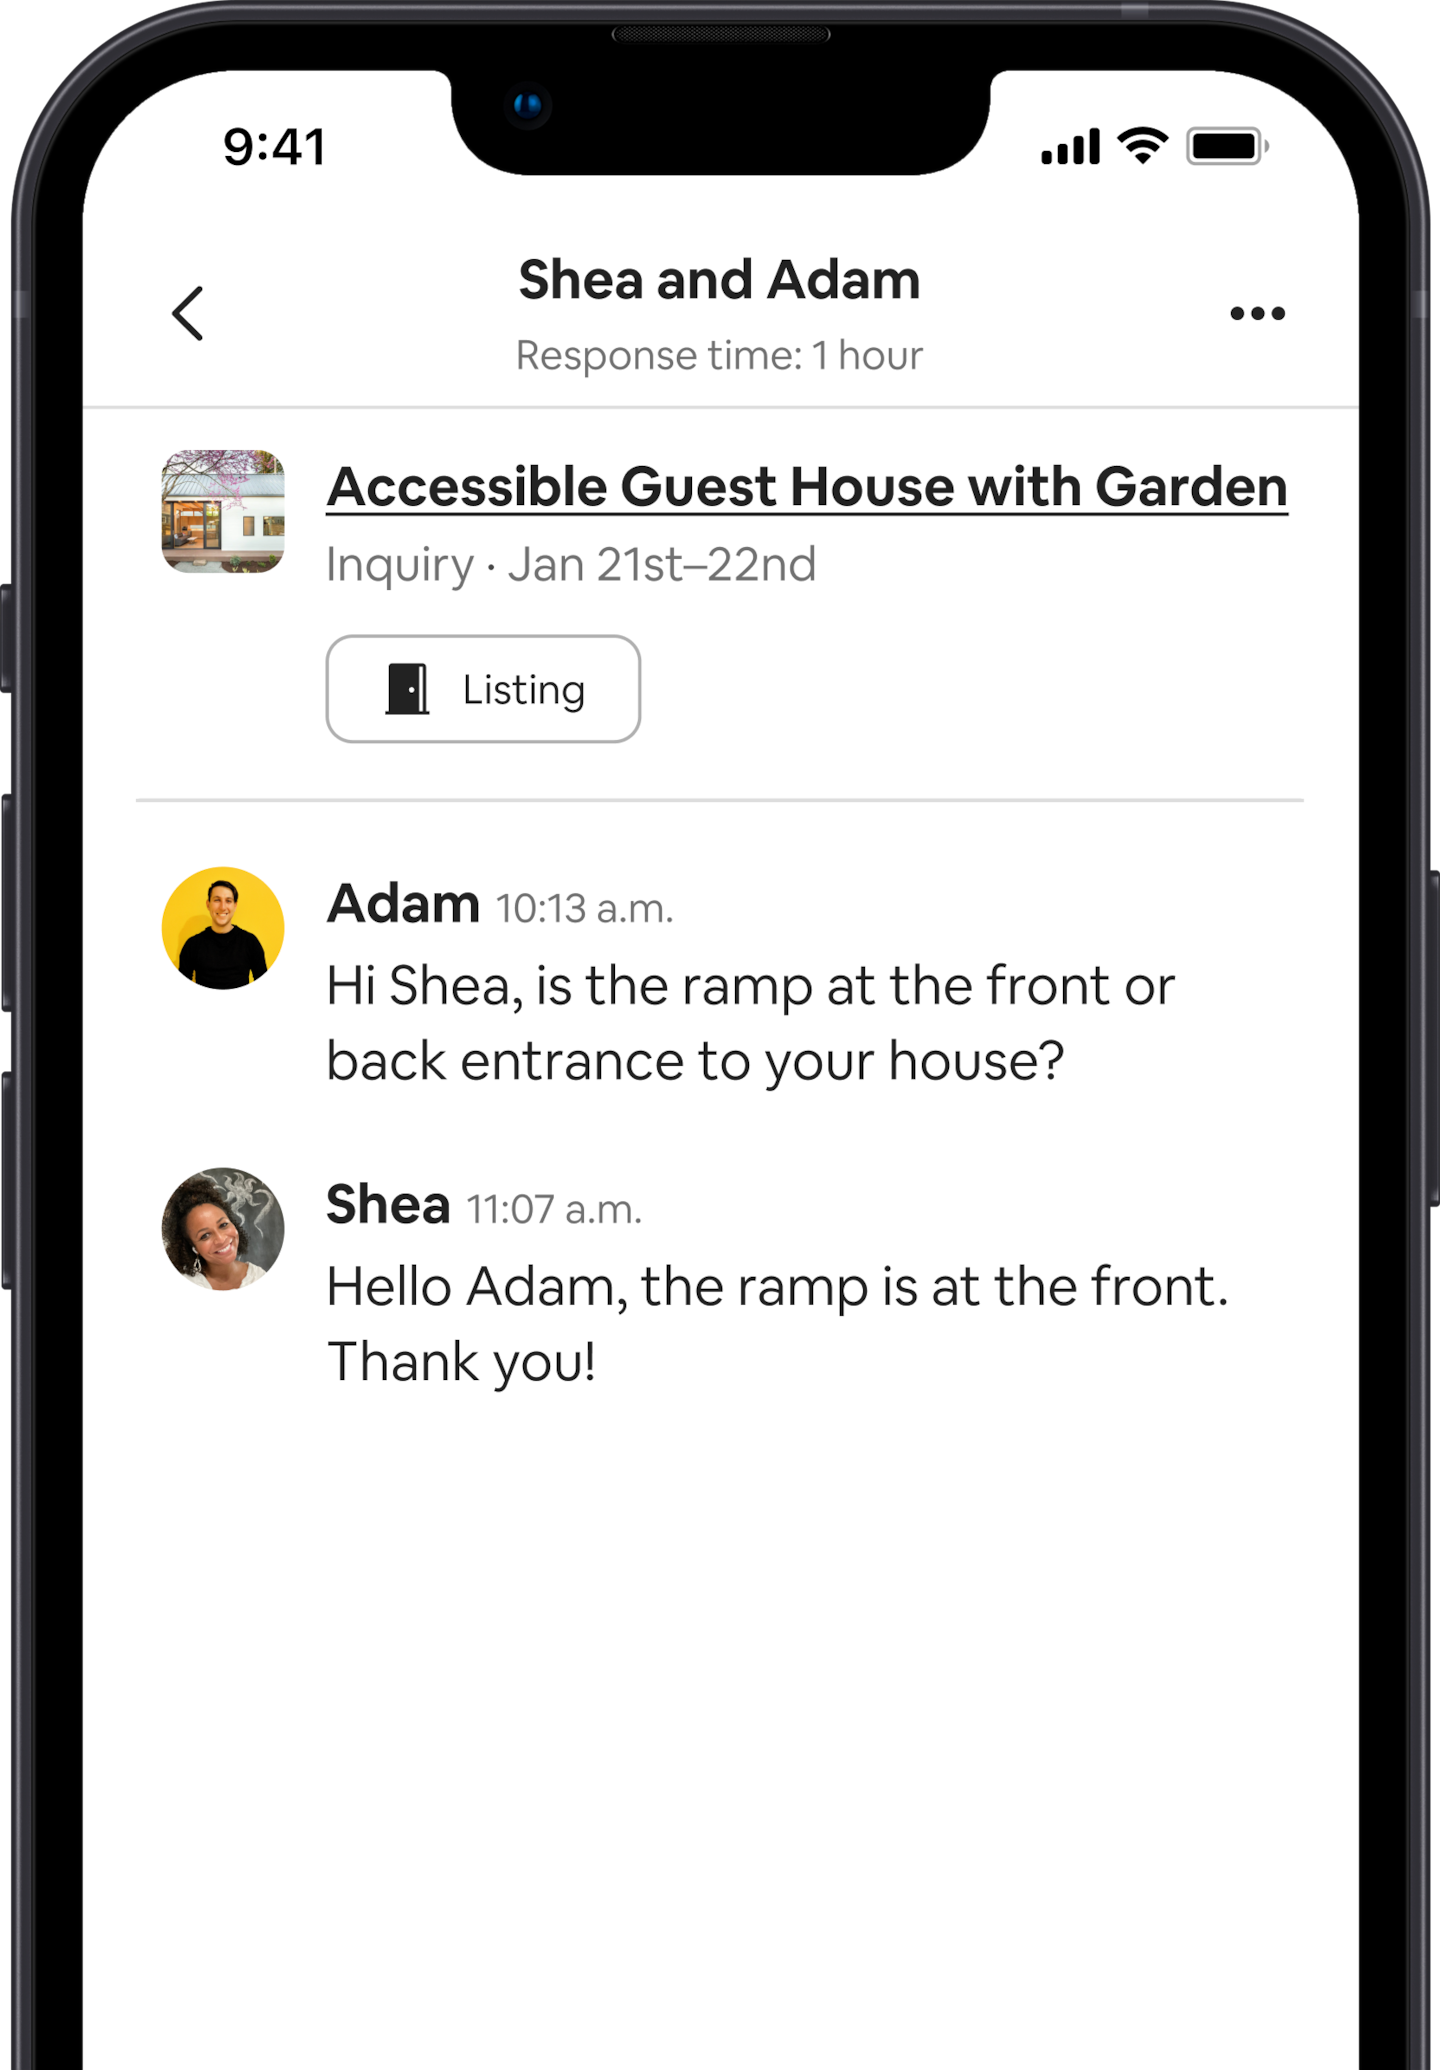 A cell phone displays messages between the Host who describes their listing as accessible and a guest who wants to know more about the space. The guest’s message reads: “Hi Shea, is the ramp at the front or back entrance to your house?” The Host’s response reads: “Hello Adam, the ramp is at the front. Thank you!”